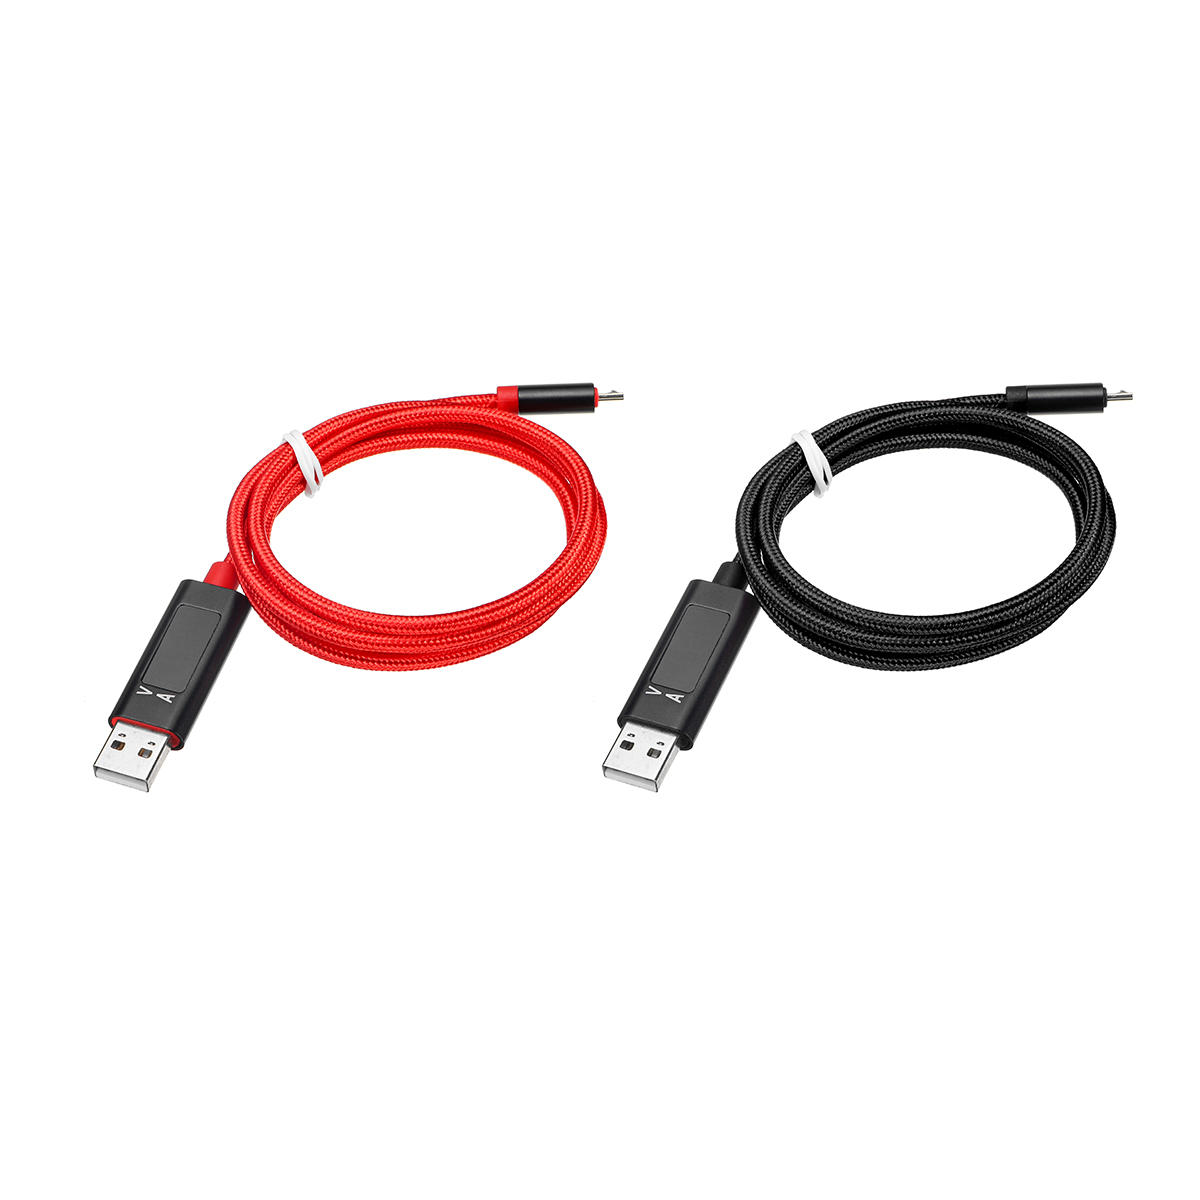 USB Charging Cable + LED Display Nylon Data Wire Cord For Android Type-C/Micro